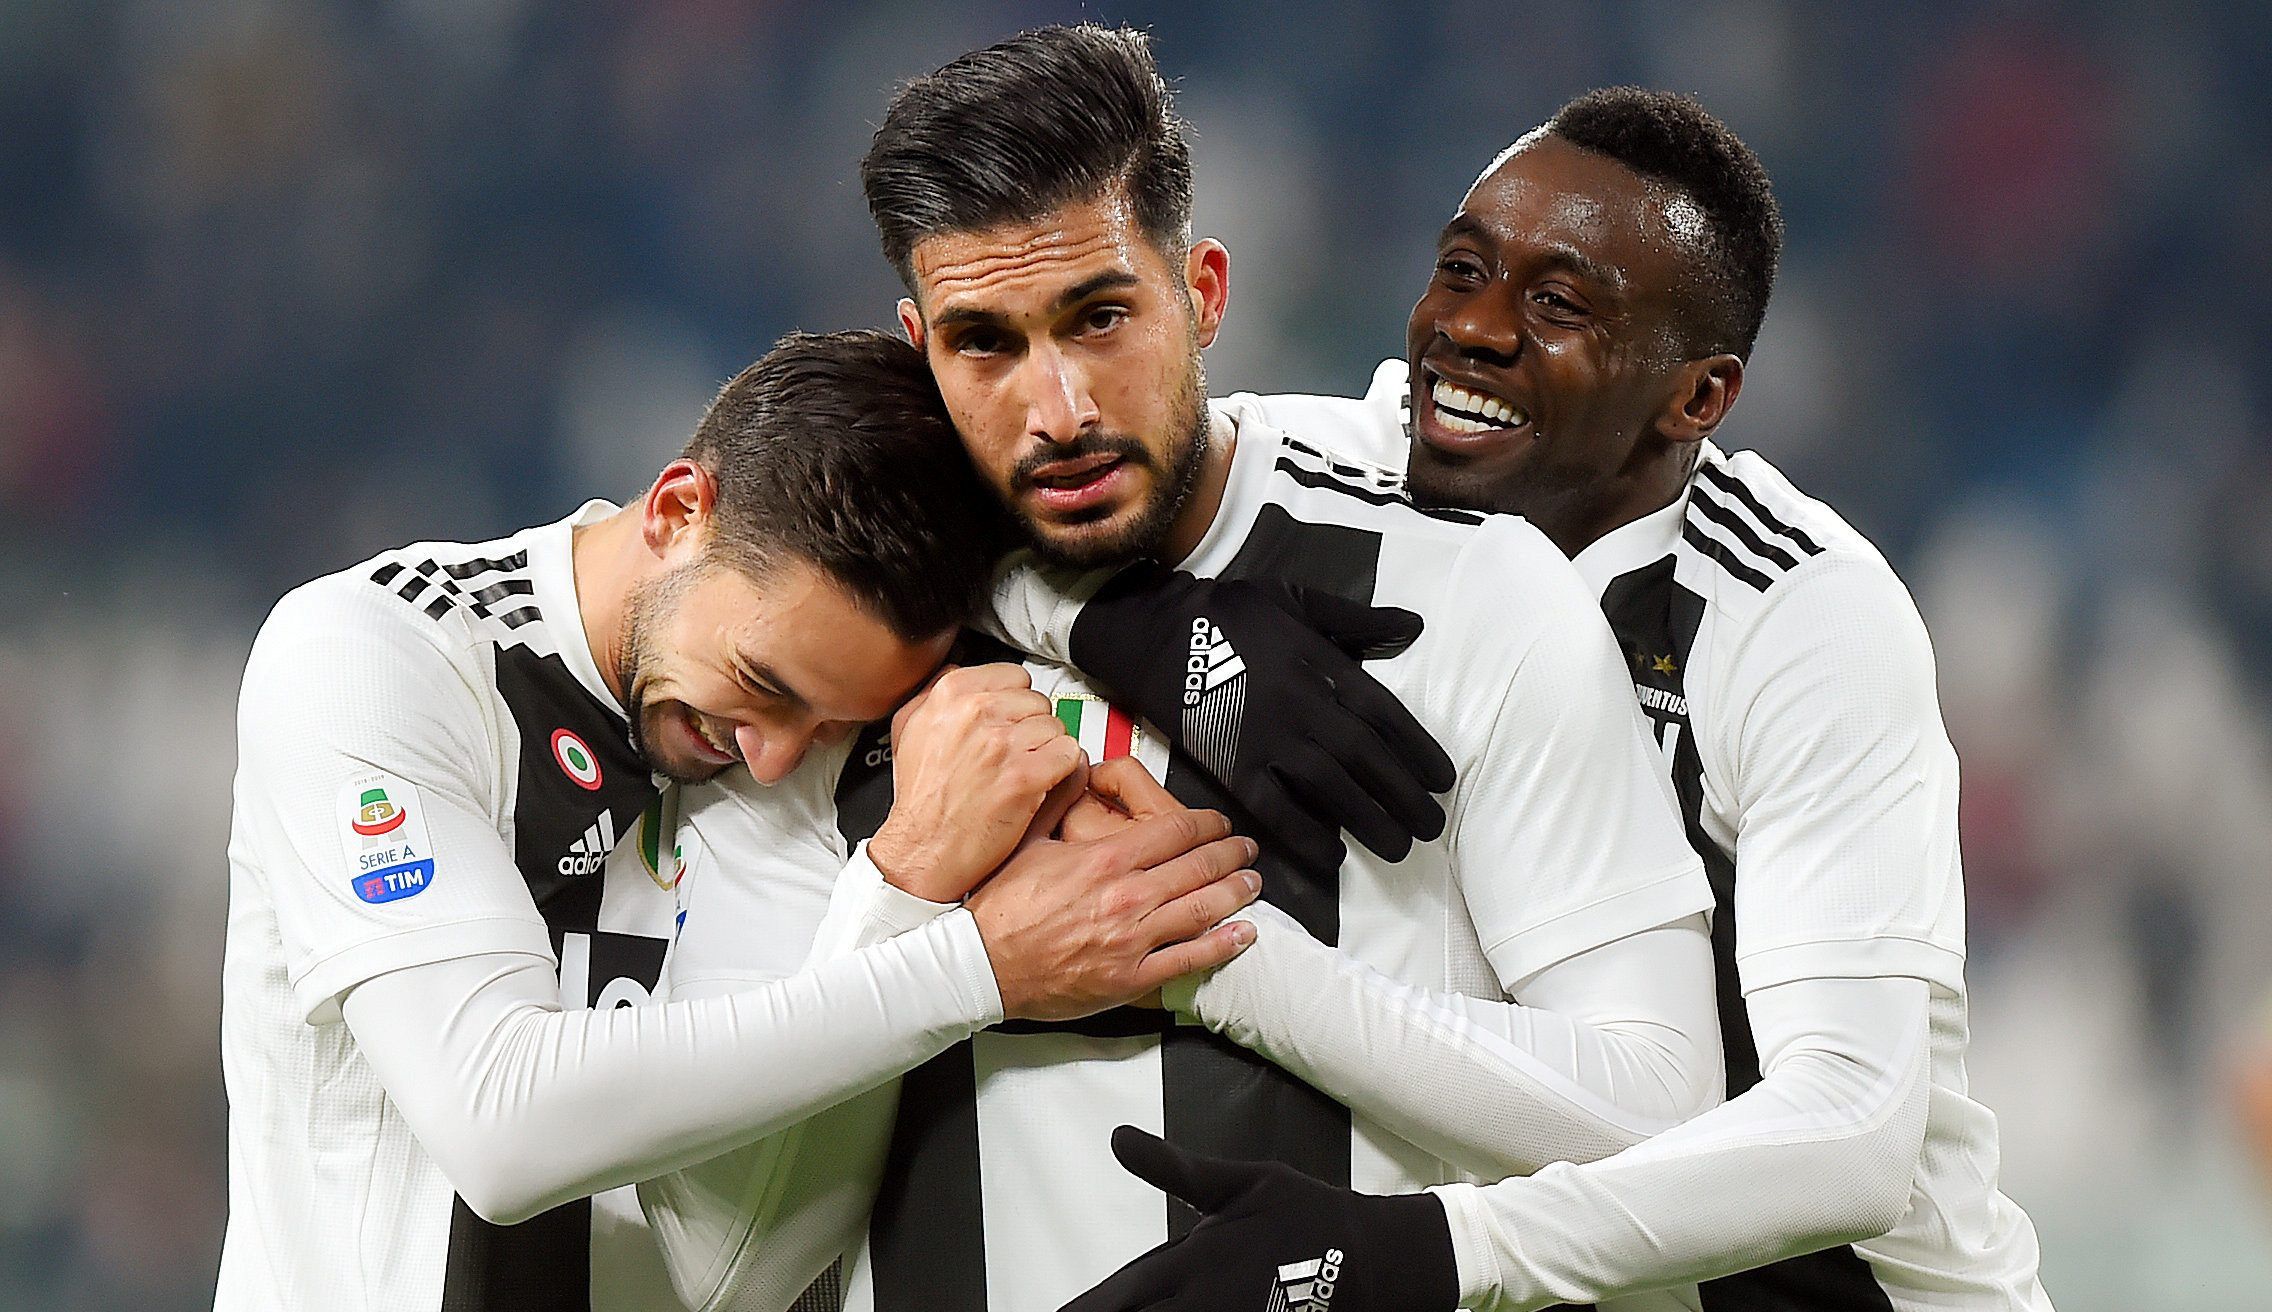 Soccer Football - Serie A - Juventus v Chievo - Allianz Stadium, Turin, Italy - January 21, 2019   Juventus' Emre Can celebrates scoring their second goal with team mates       REUTERS/Massimo Pinca     TPX IMAGES OF THE DAY